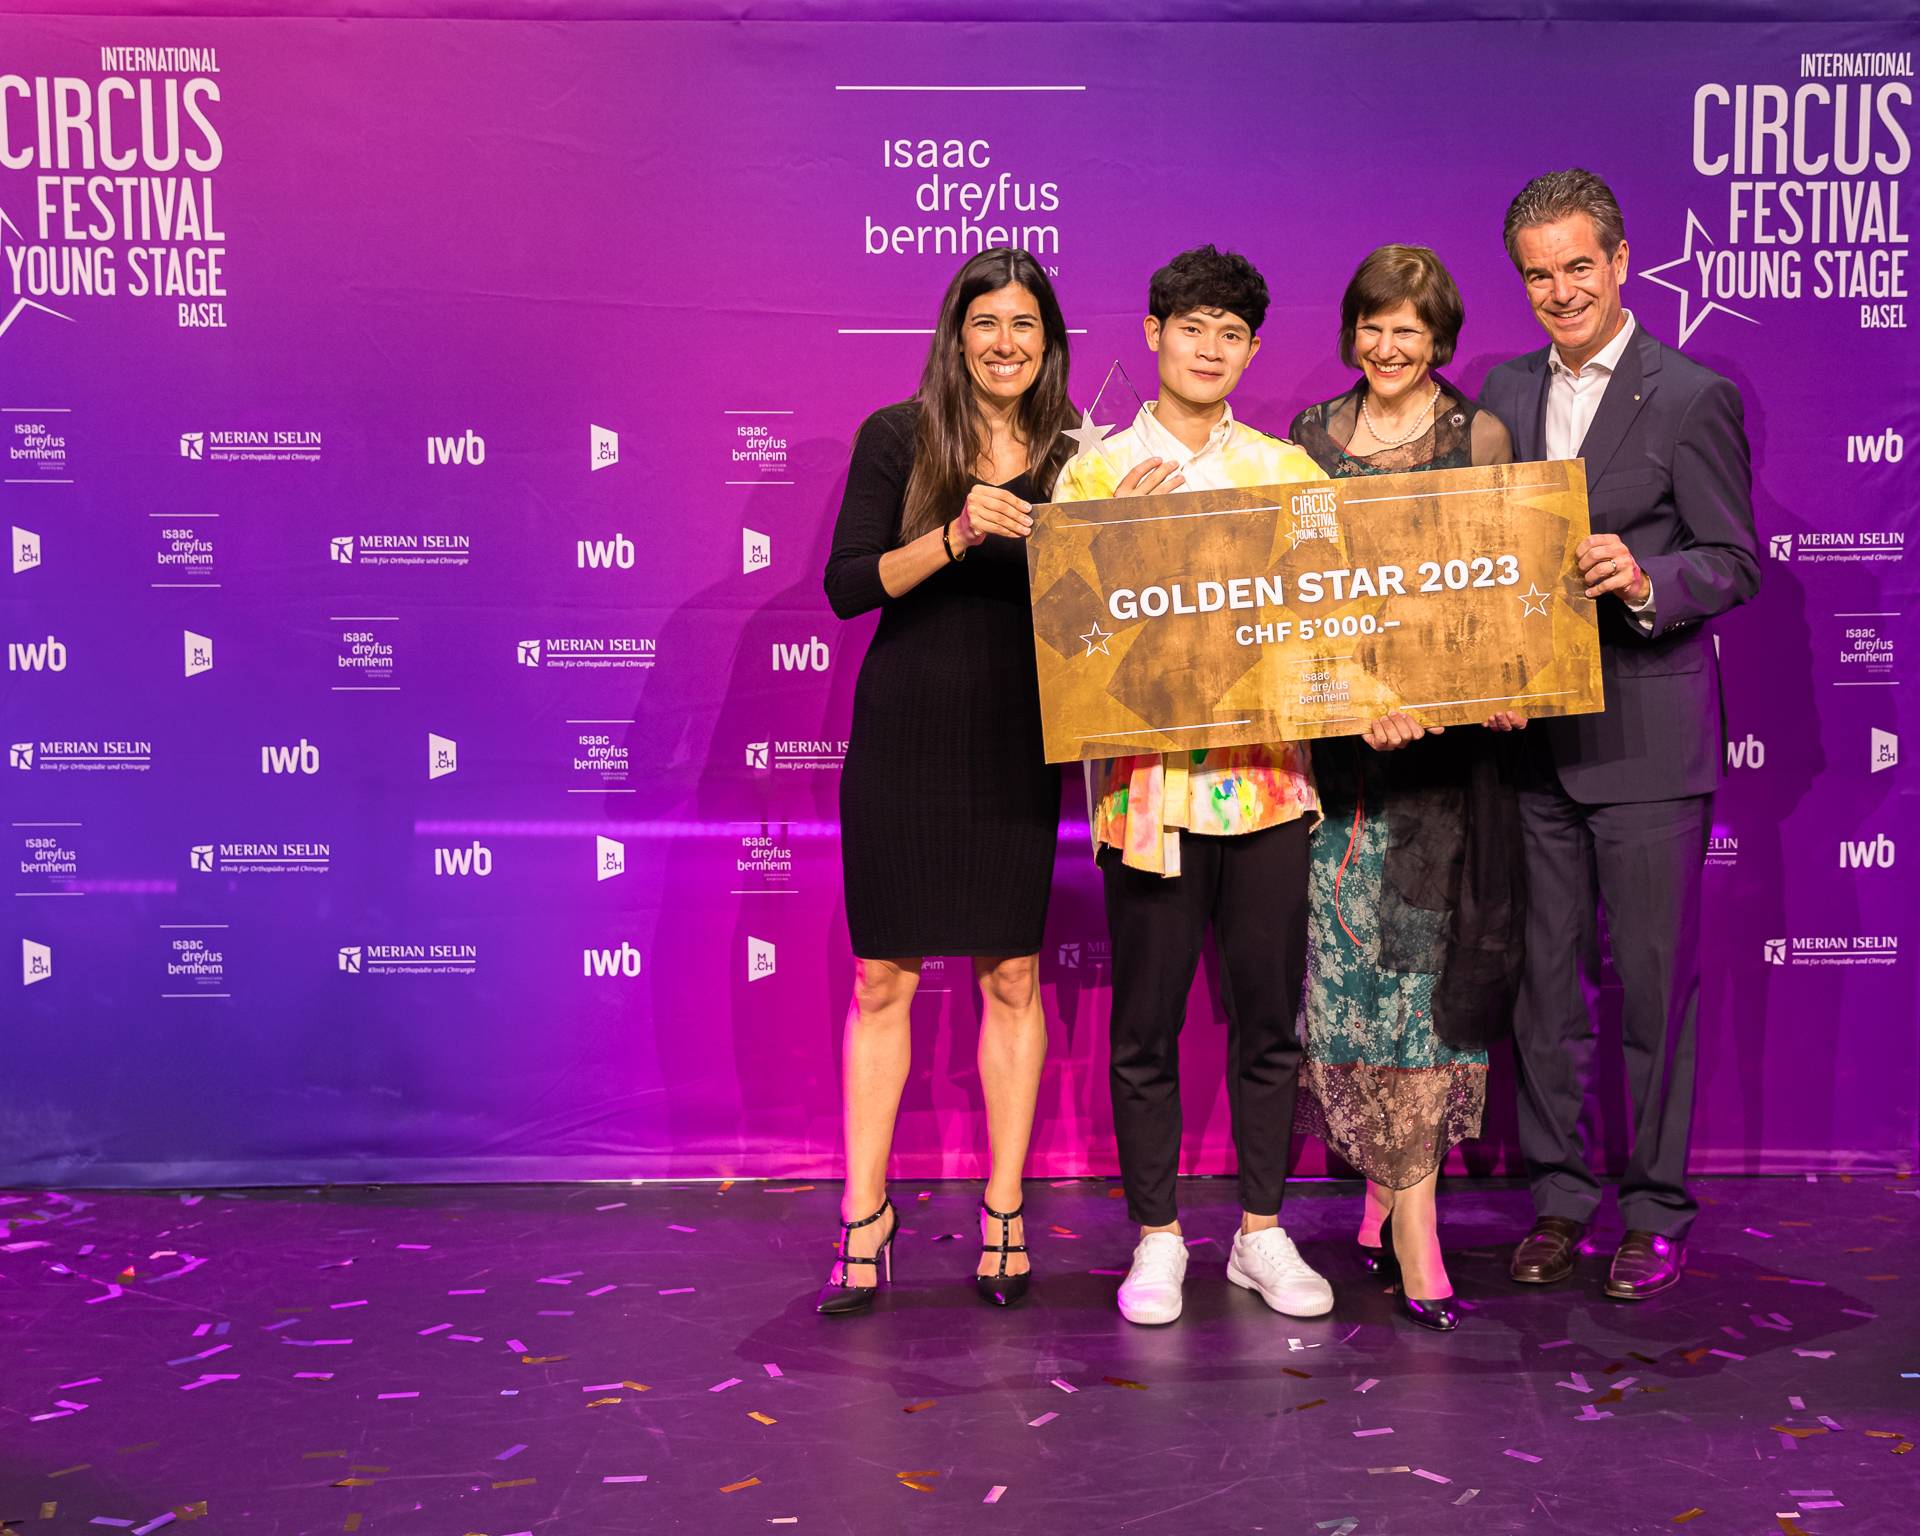 These are the winners of the 14th International Circus Festival YOUNG STAGE Basel 2023